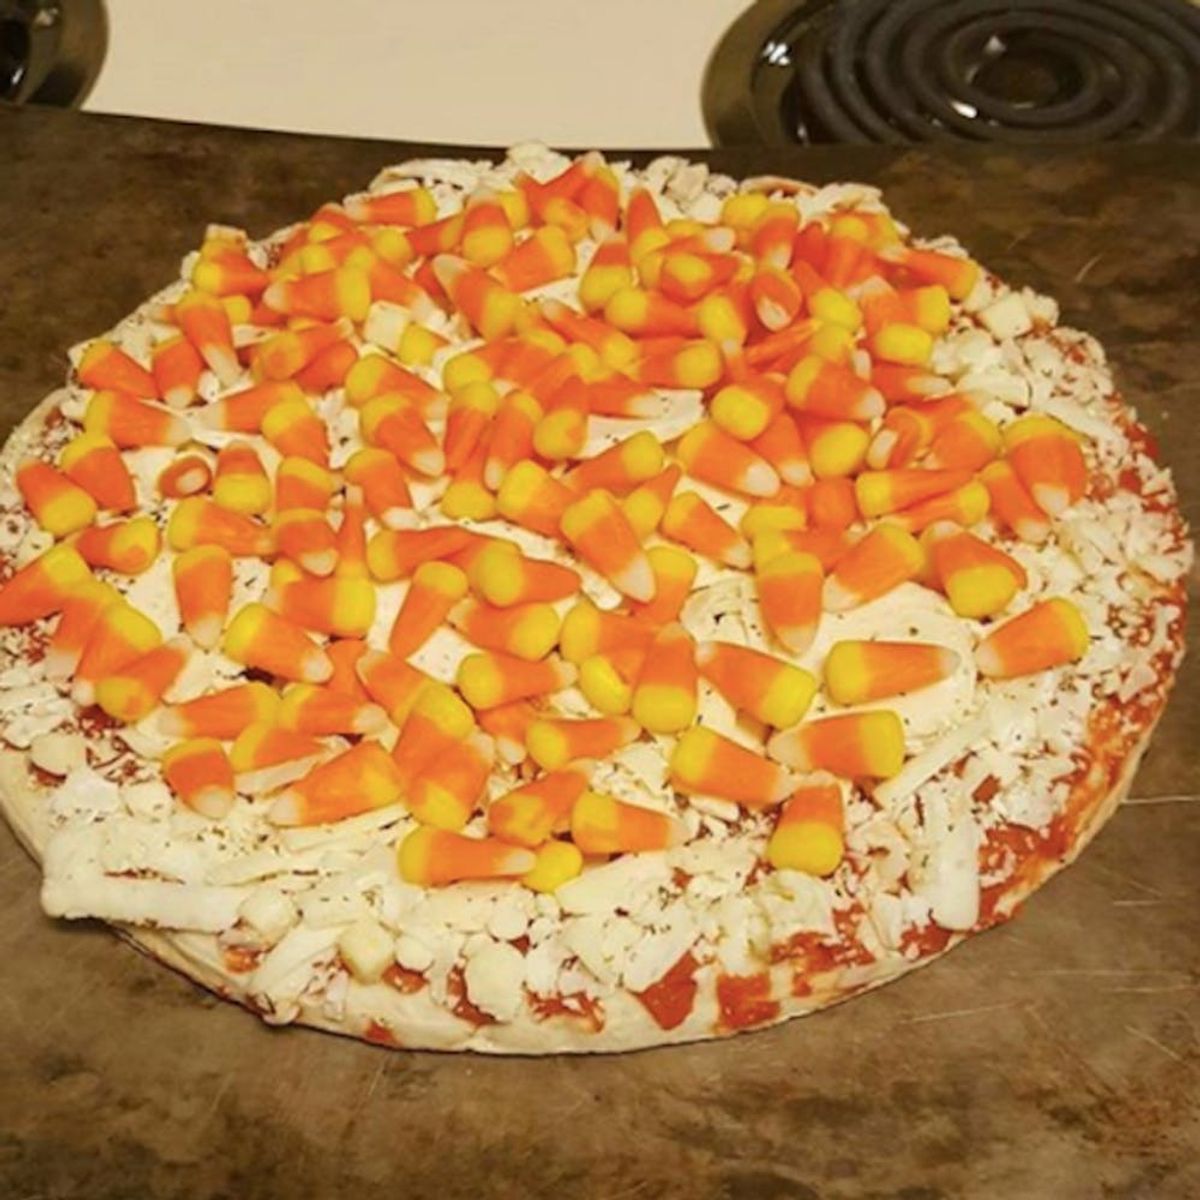 Candy Corn Pizza Has the Internet Completely Divided